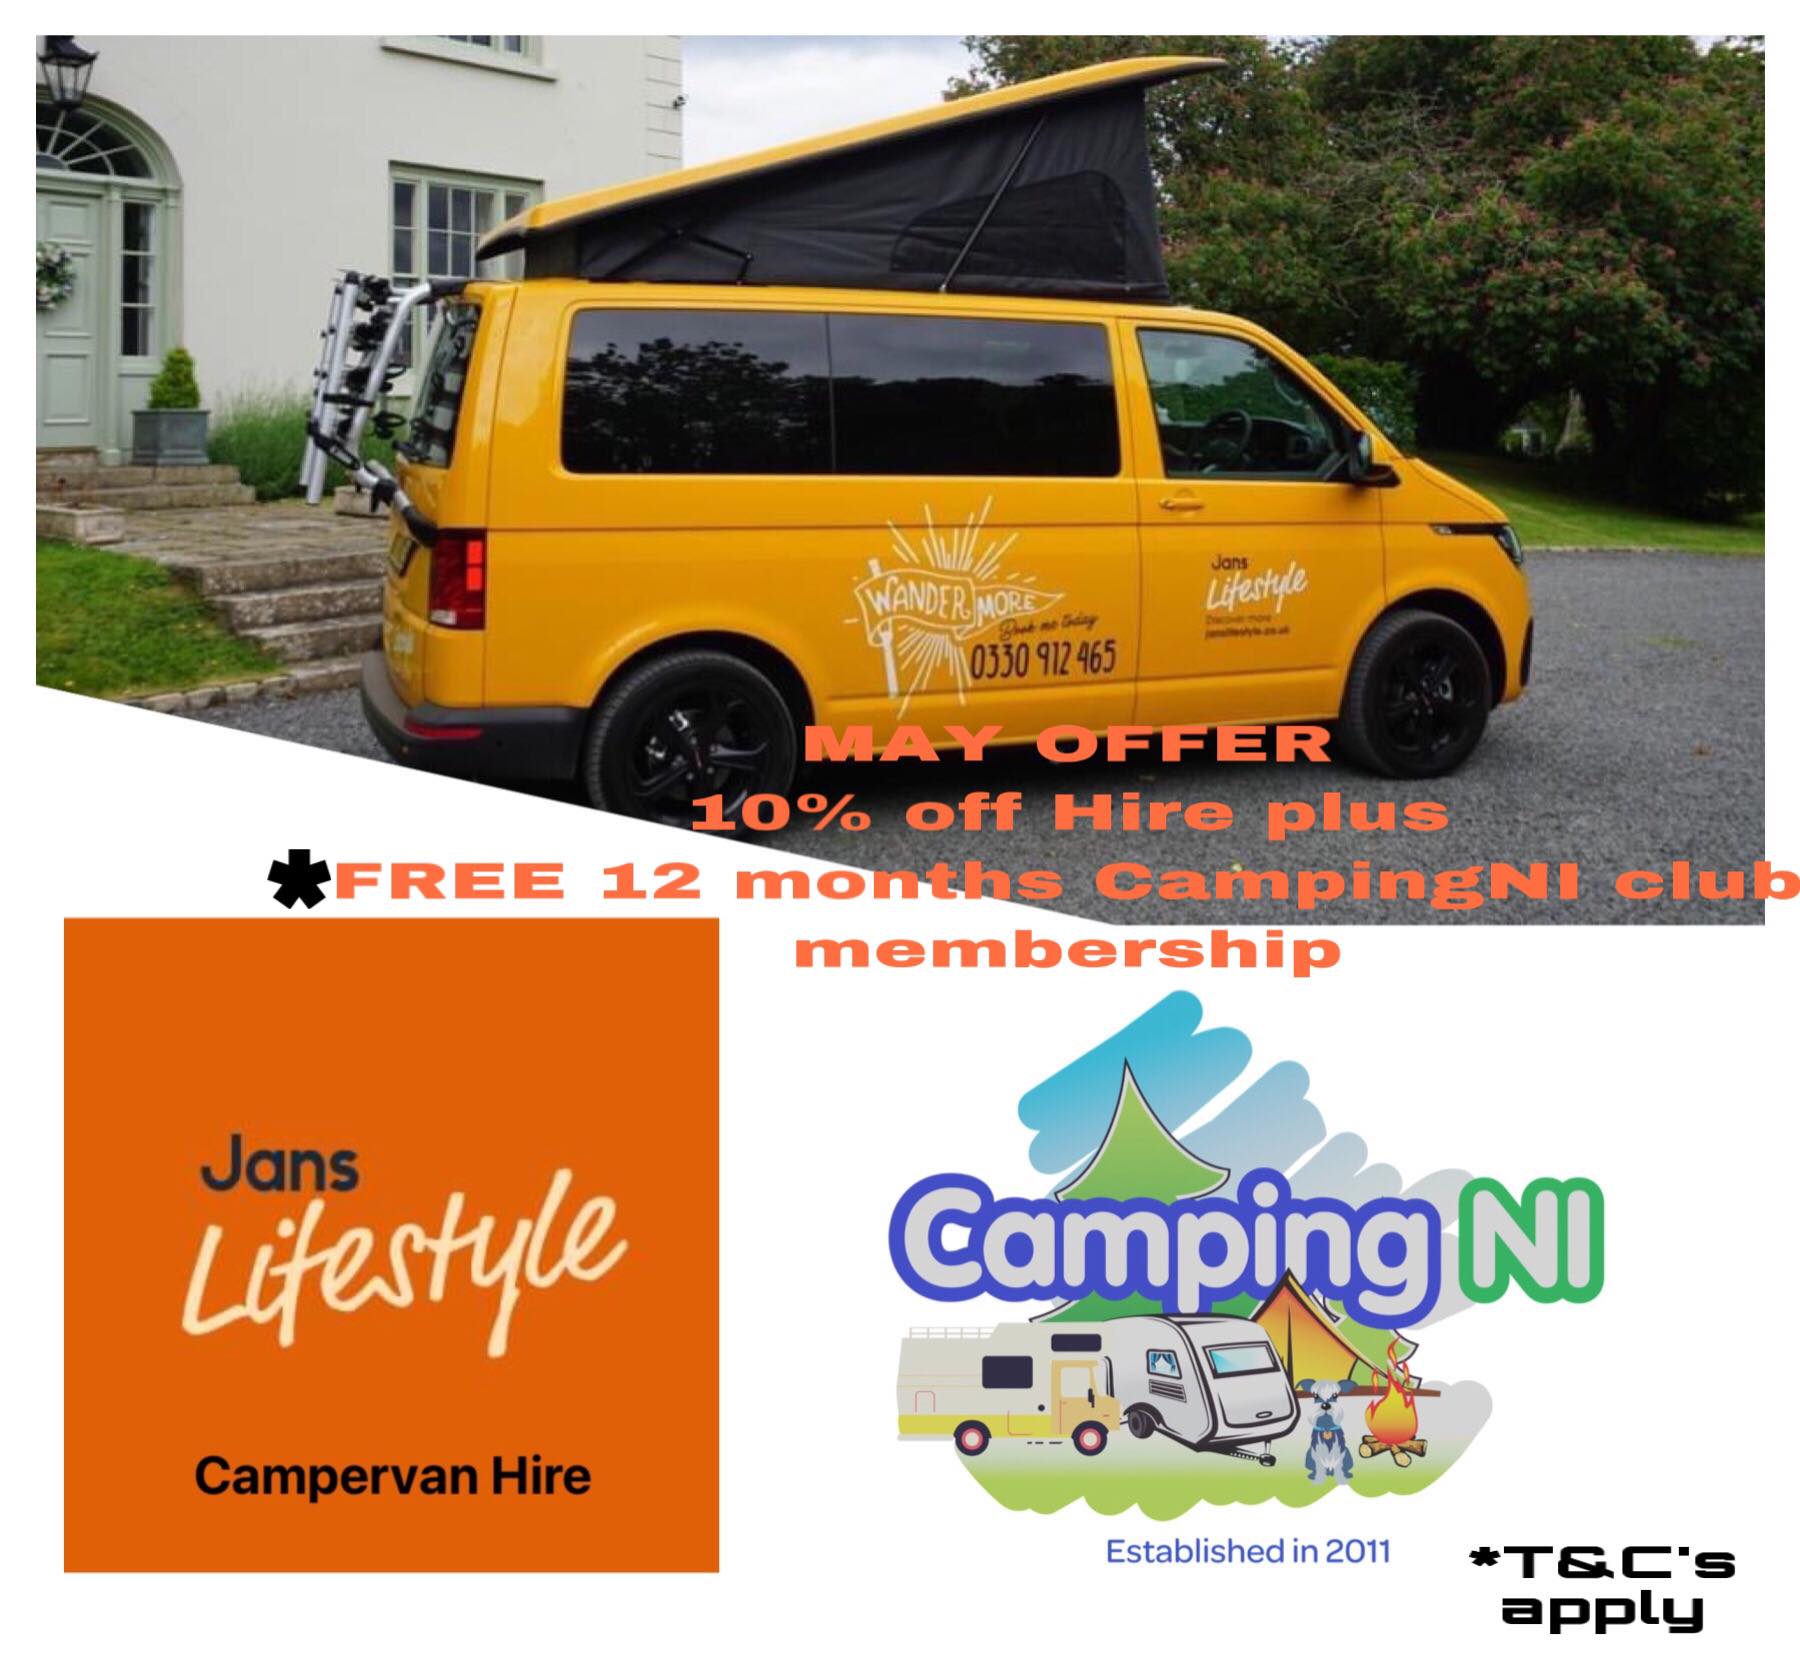 May offer Jans Lifestyle CampingNI